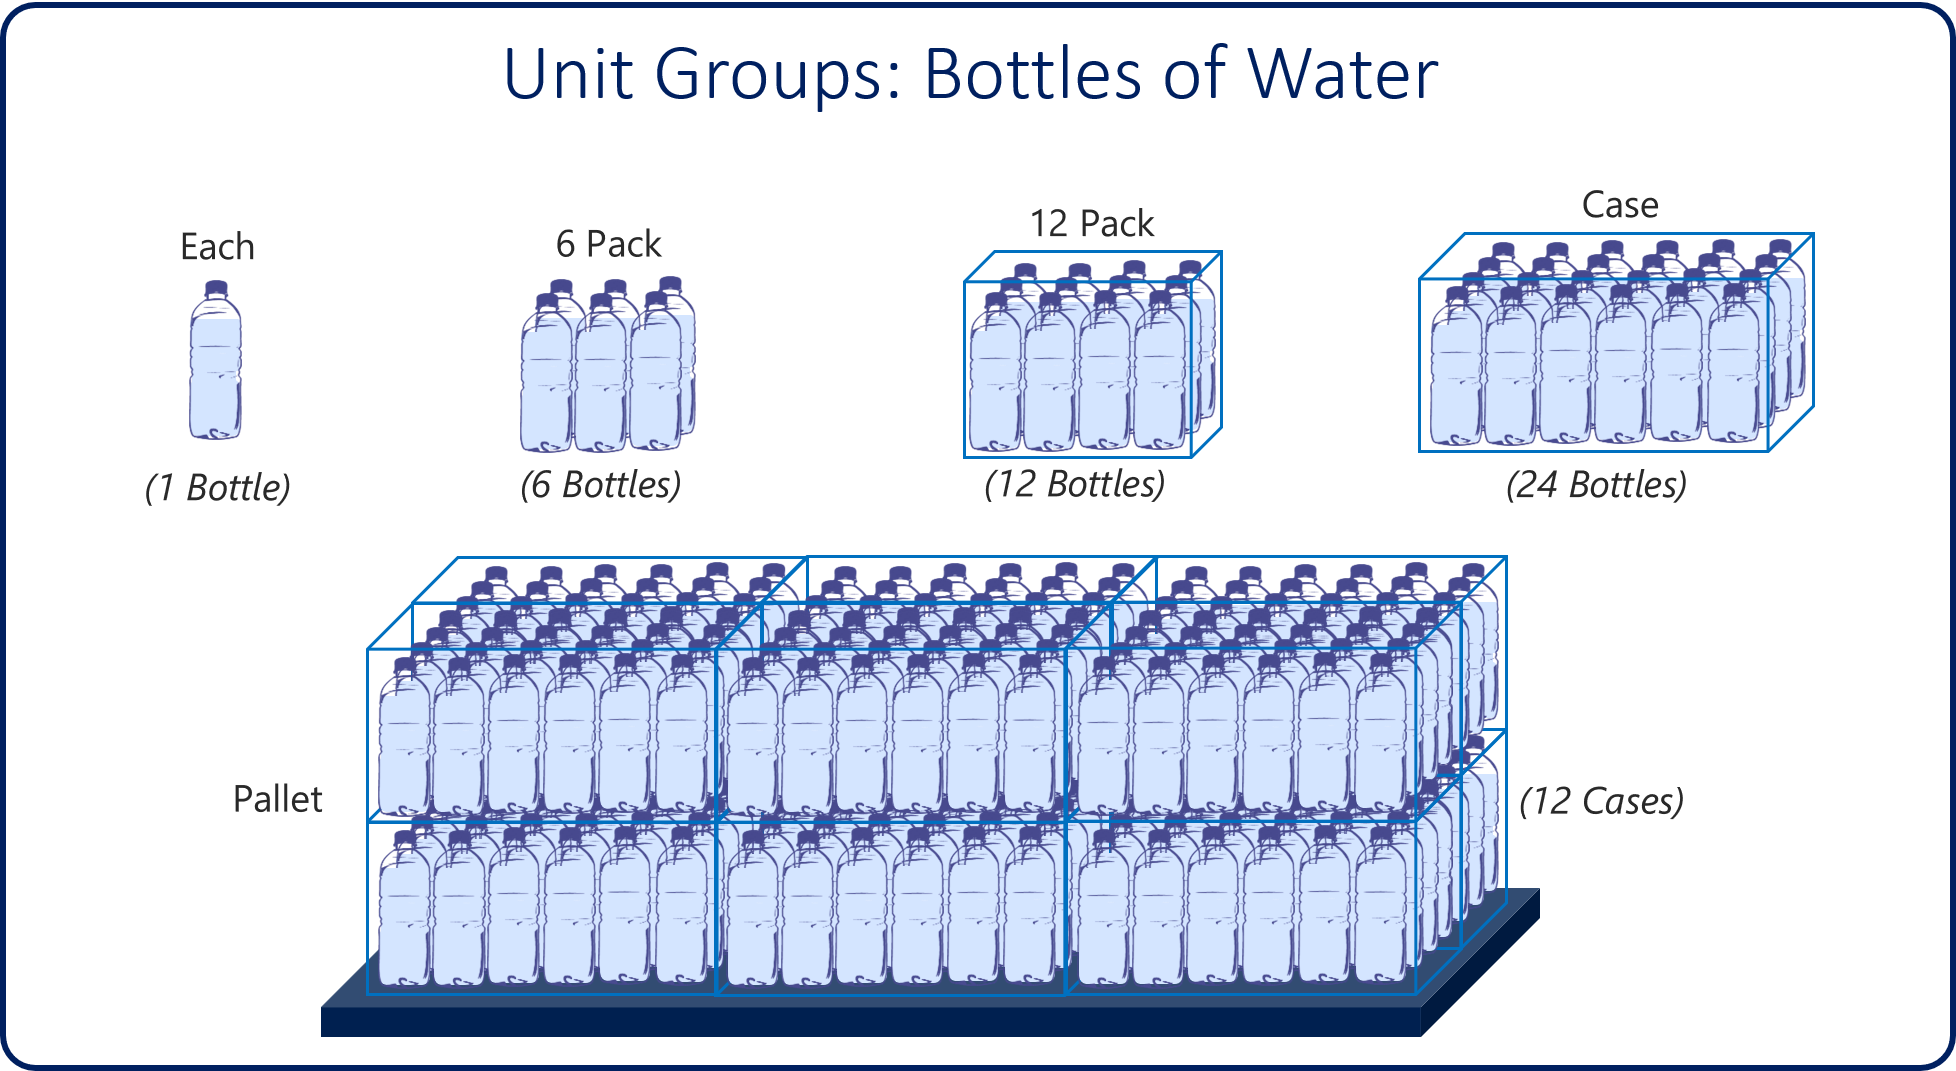 Unit groups: Bottles of water. Each, 6 pack, 12 pack, case (24), and pallet (12 cases).